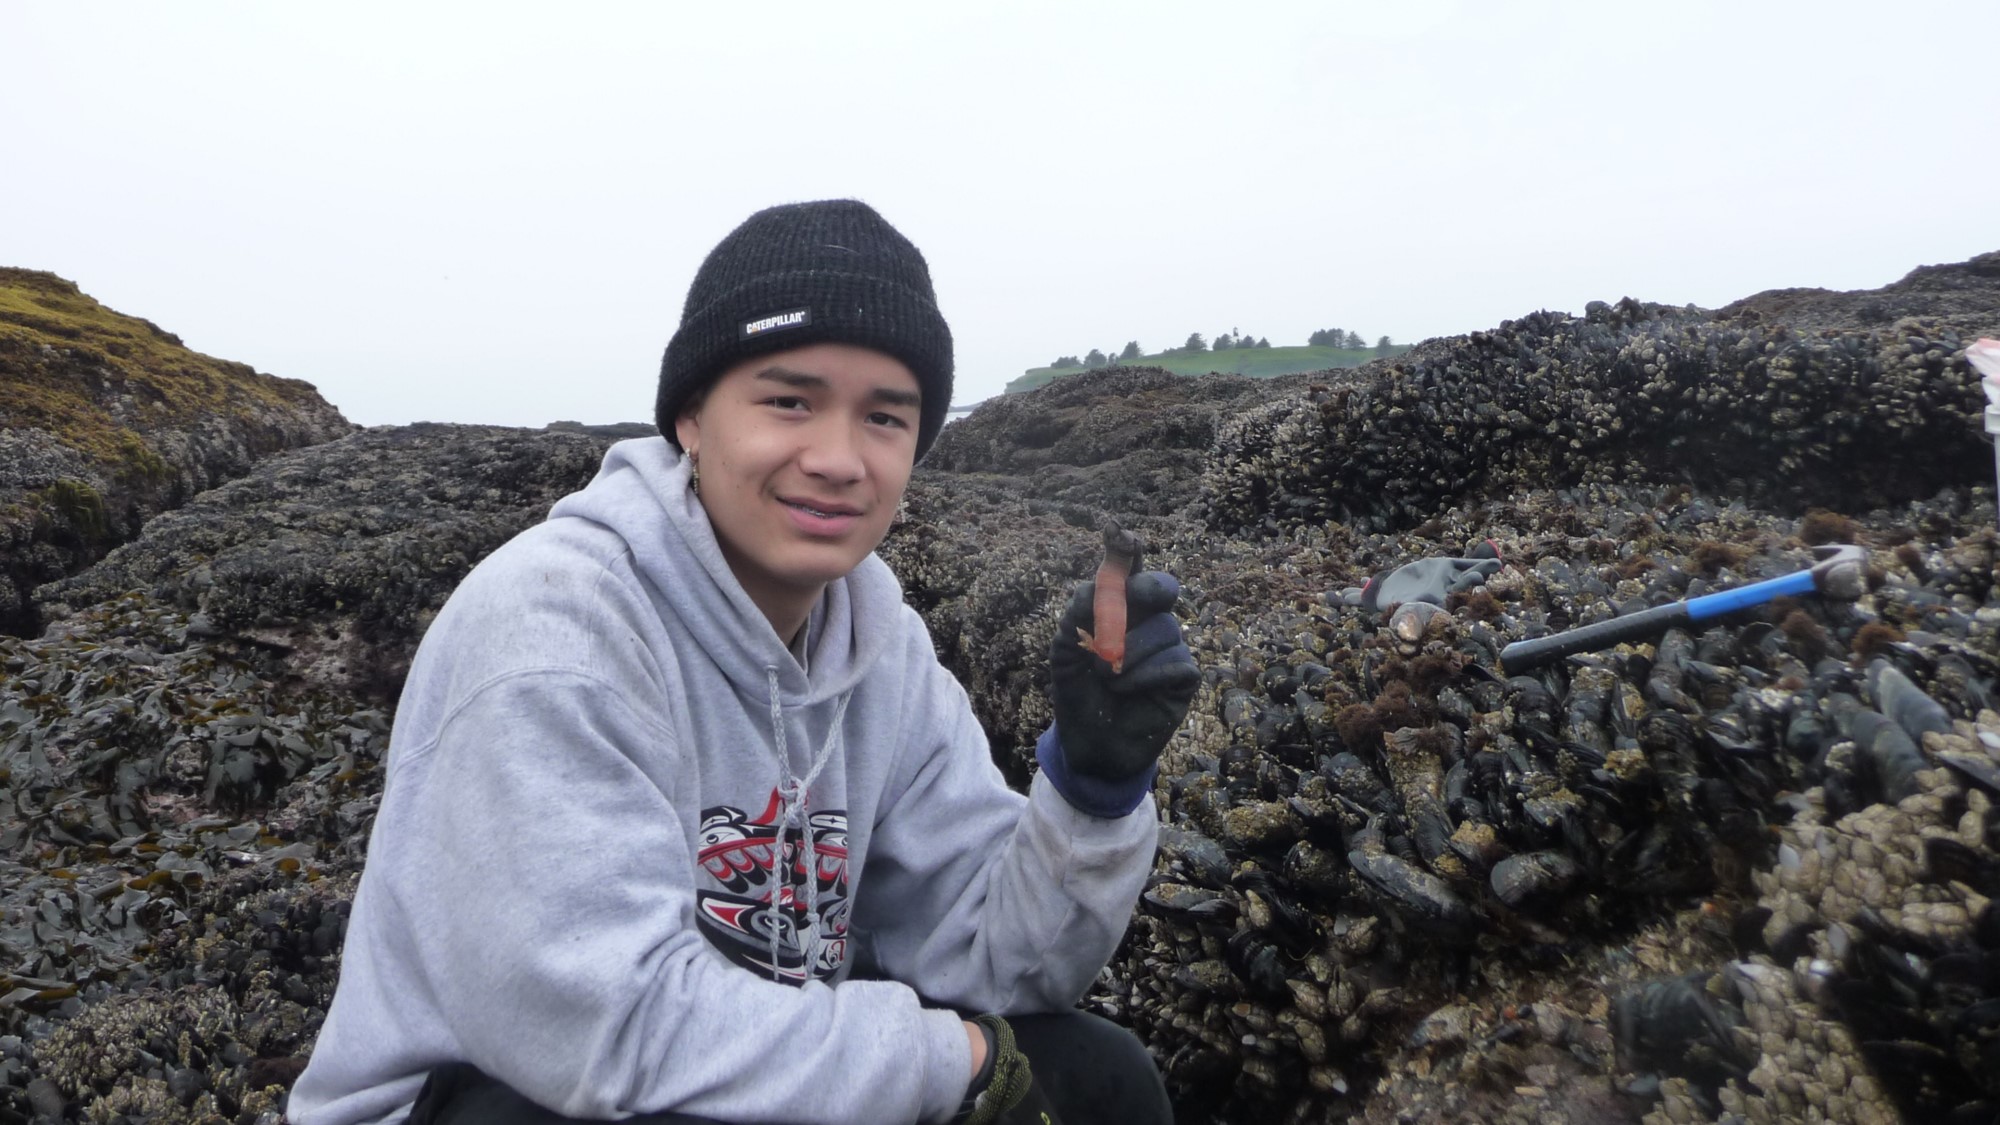 slide 2 - Janine Ledford's son holding up a gooseneck barnacle, while squatting on the rocky coastline, on a cloudy day.